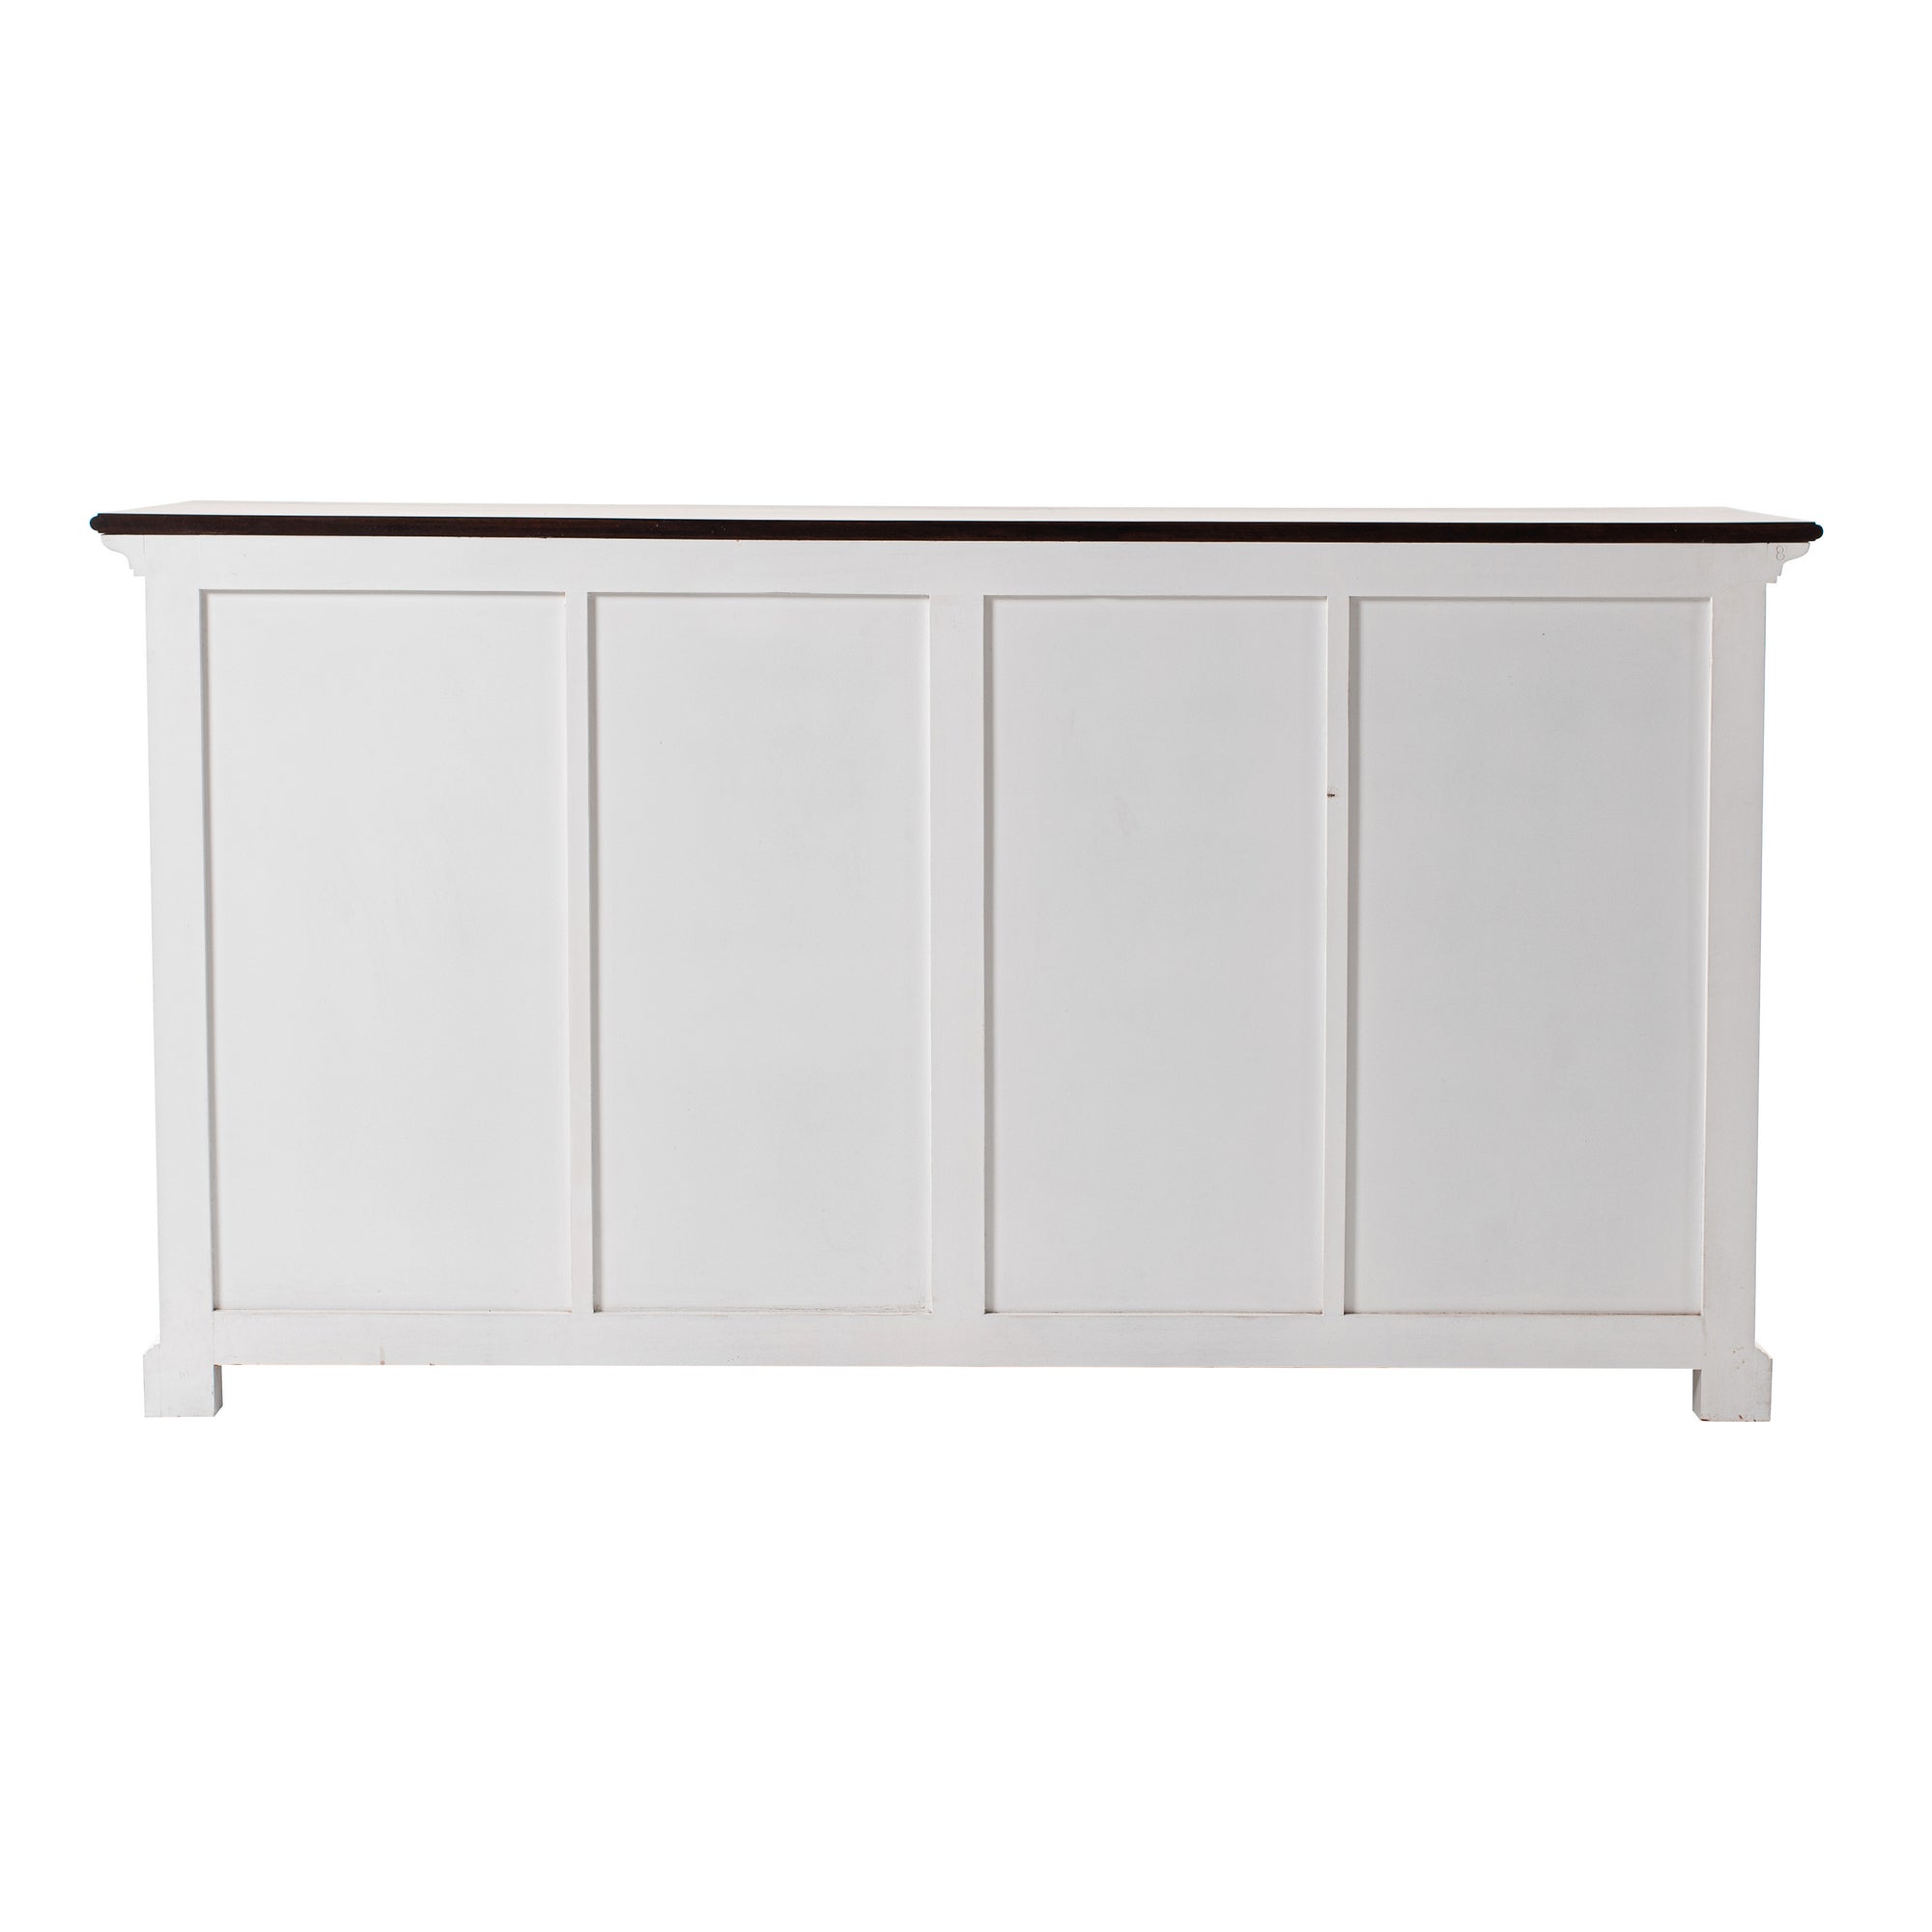 Halifax Accent Buffet with 4 Baskets - White Distress & Deep Brown - Notbrand